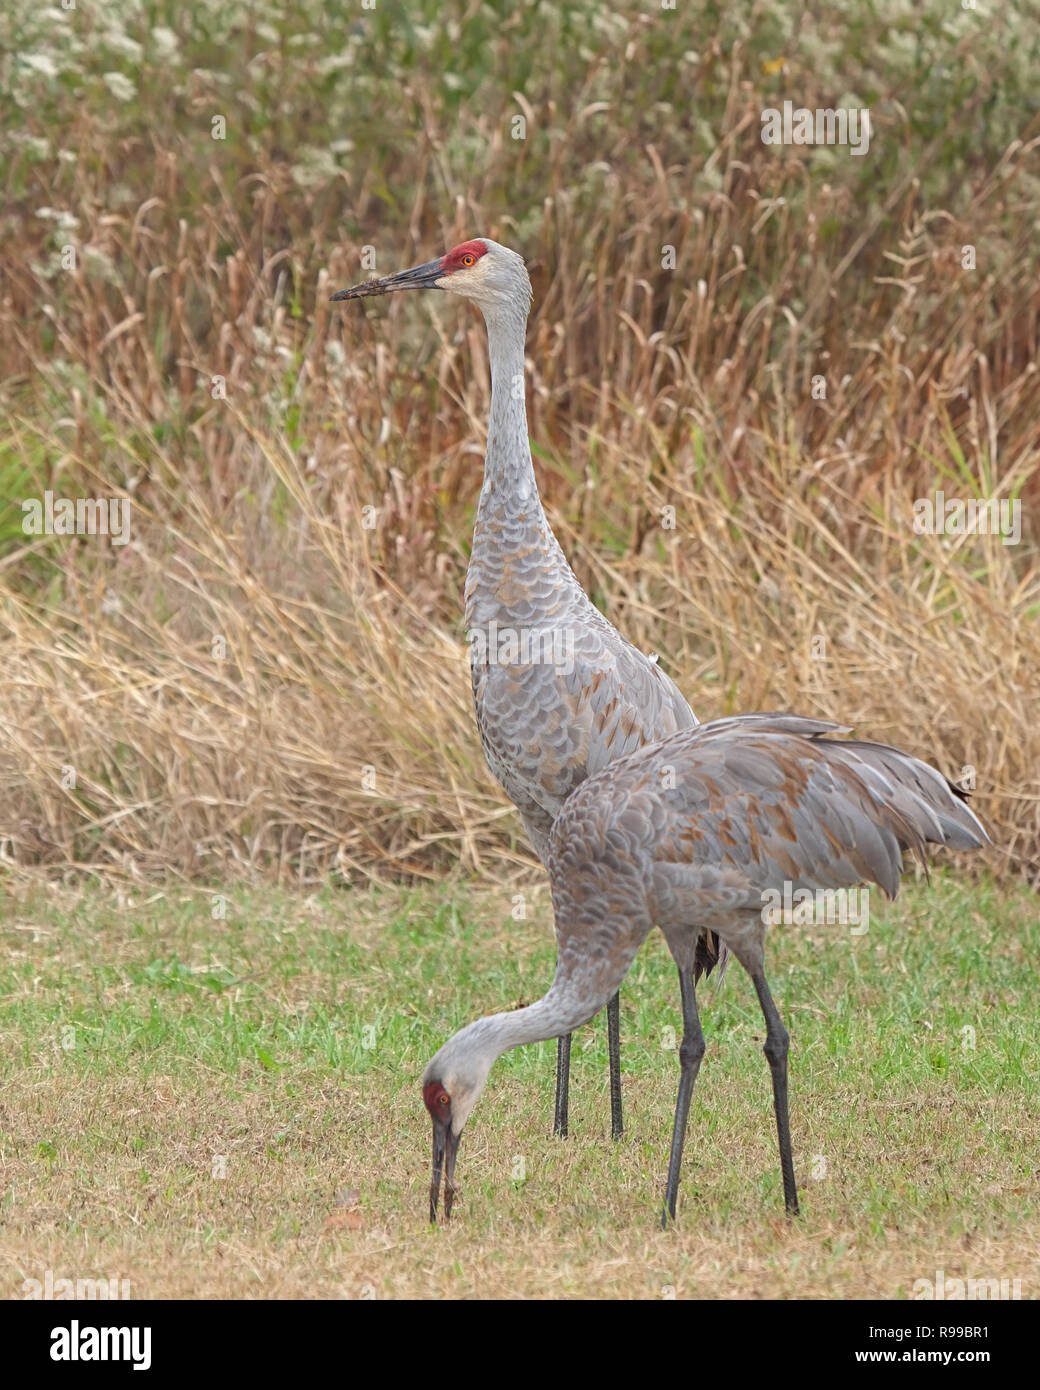 Two sandhill cranes walk in a meadow filled with prairie grass, gone to seed ironweed and goldenrod. One crane stands guard over the other as it eats  Stock Photo